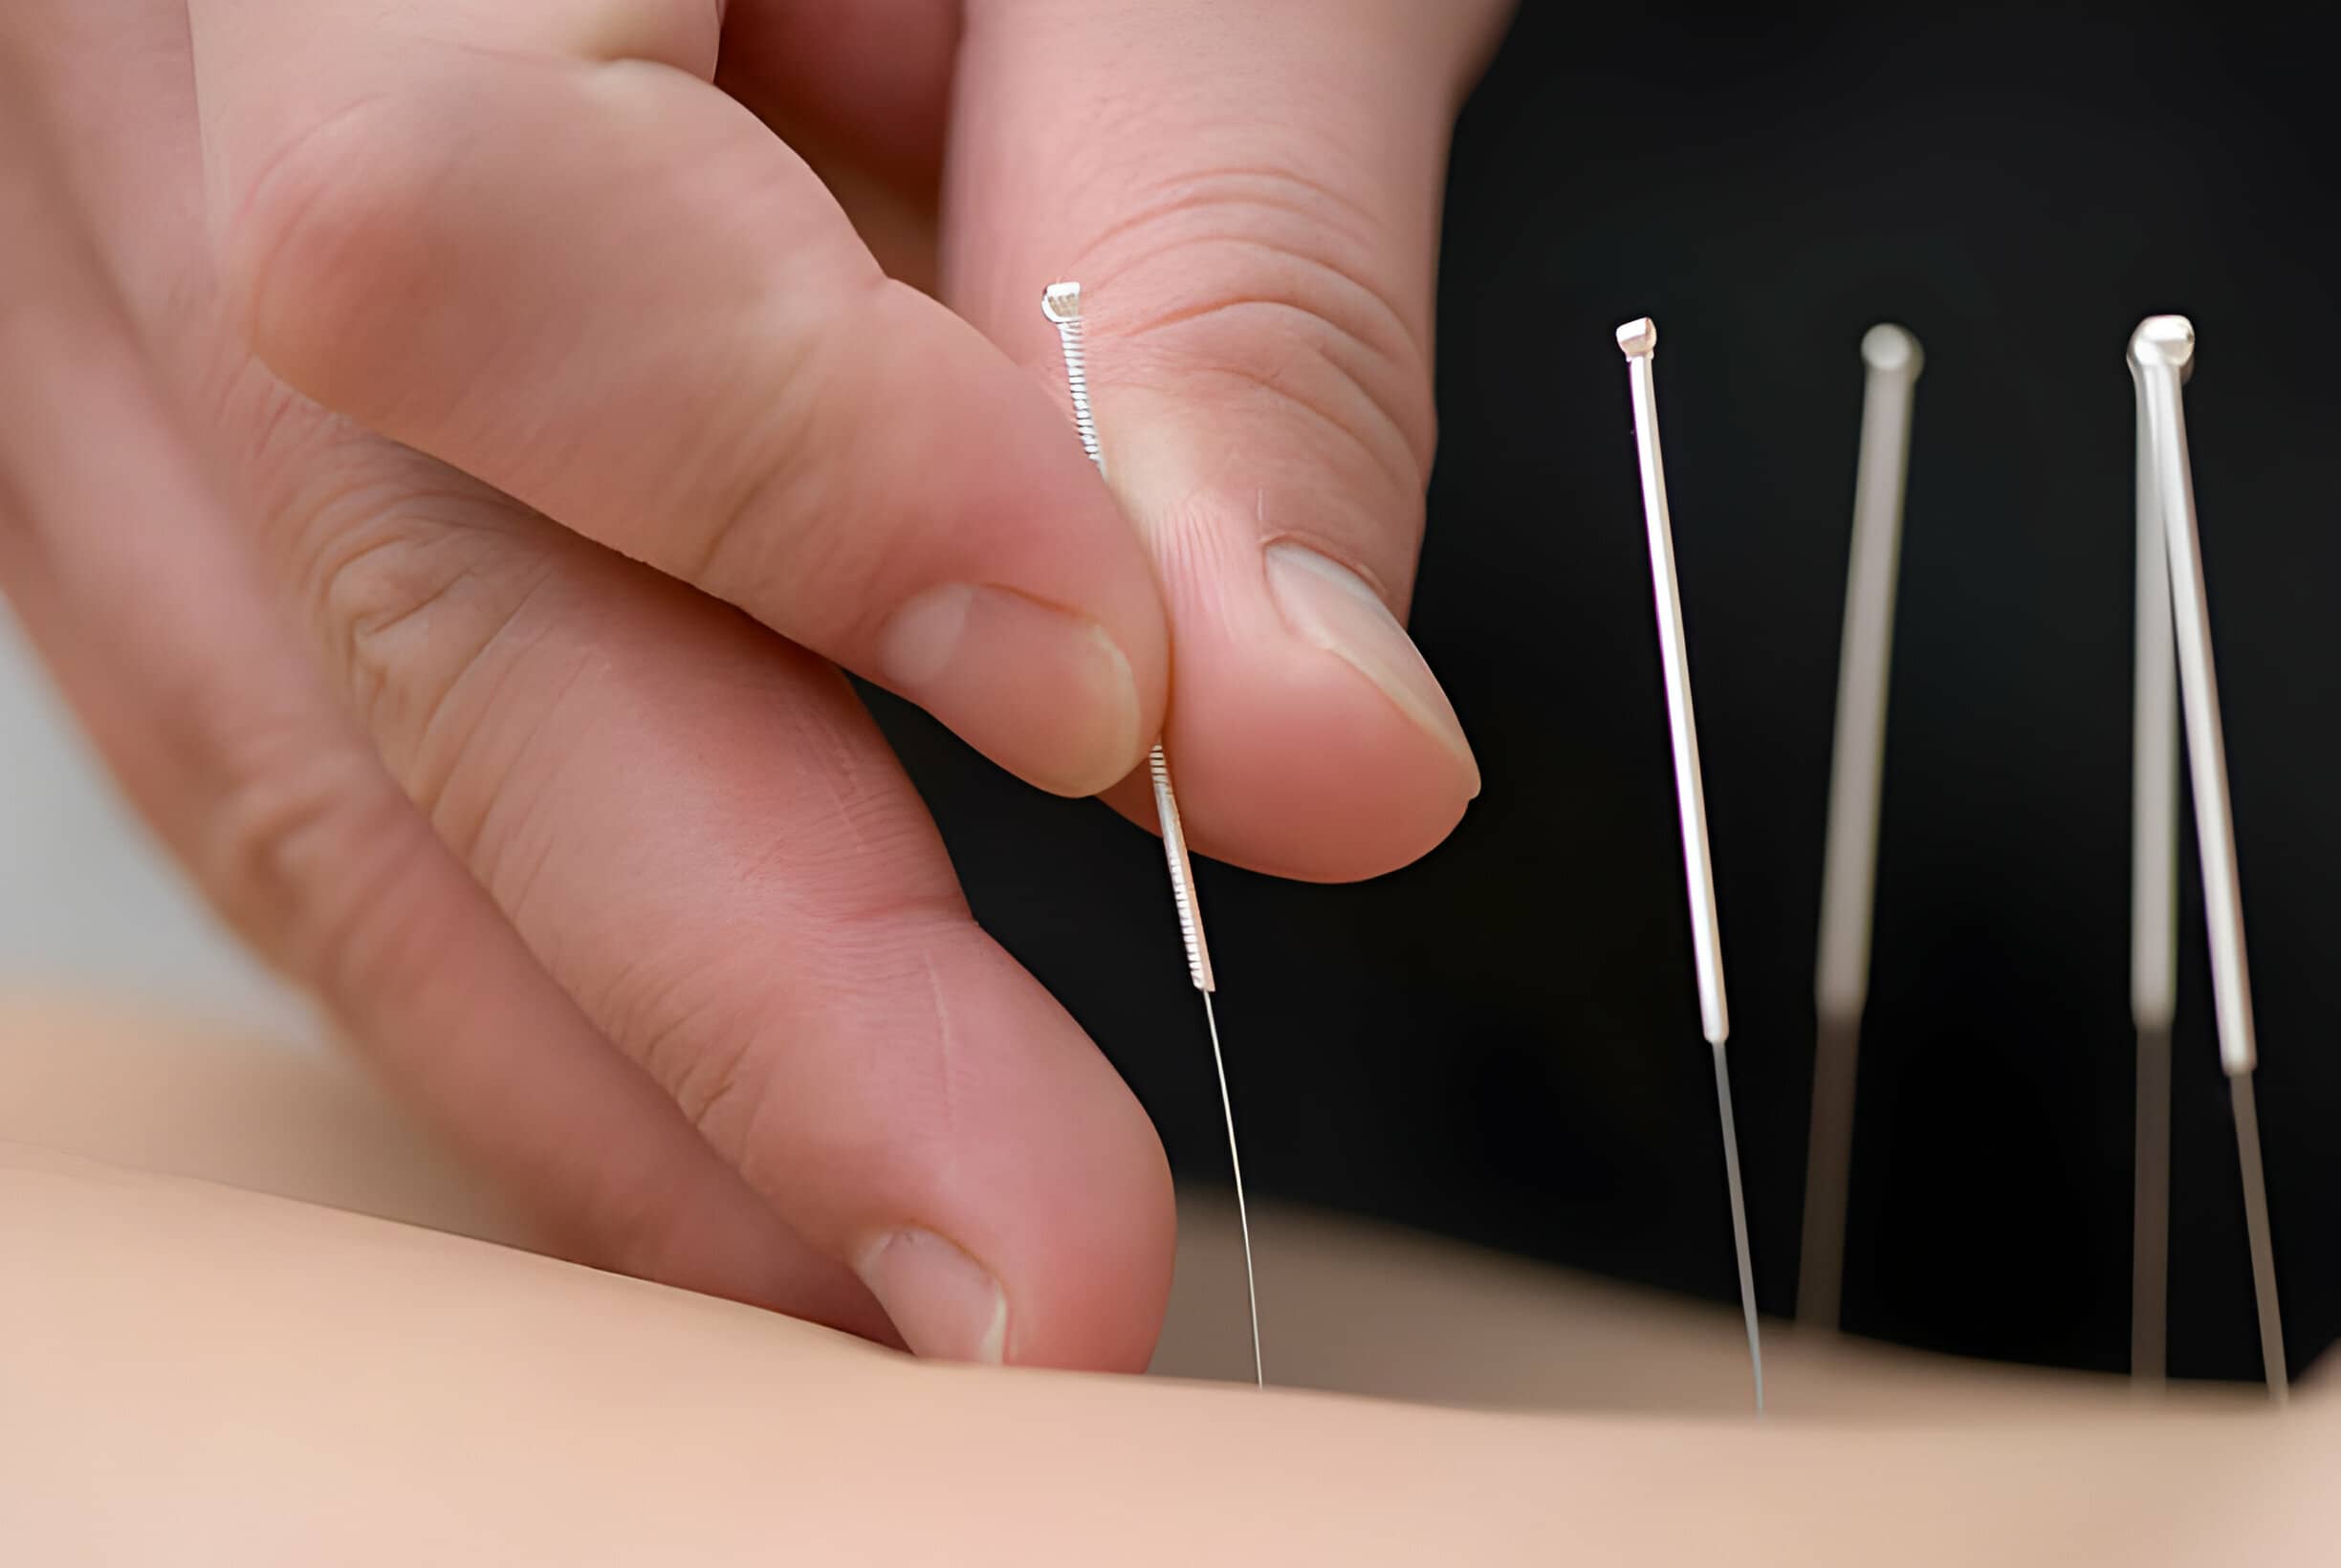 What should I expect after acupuncture?